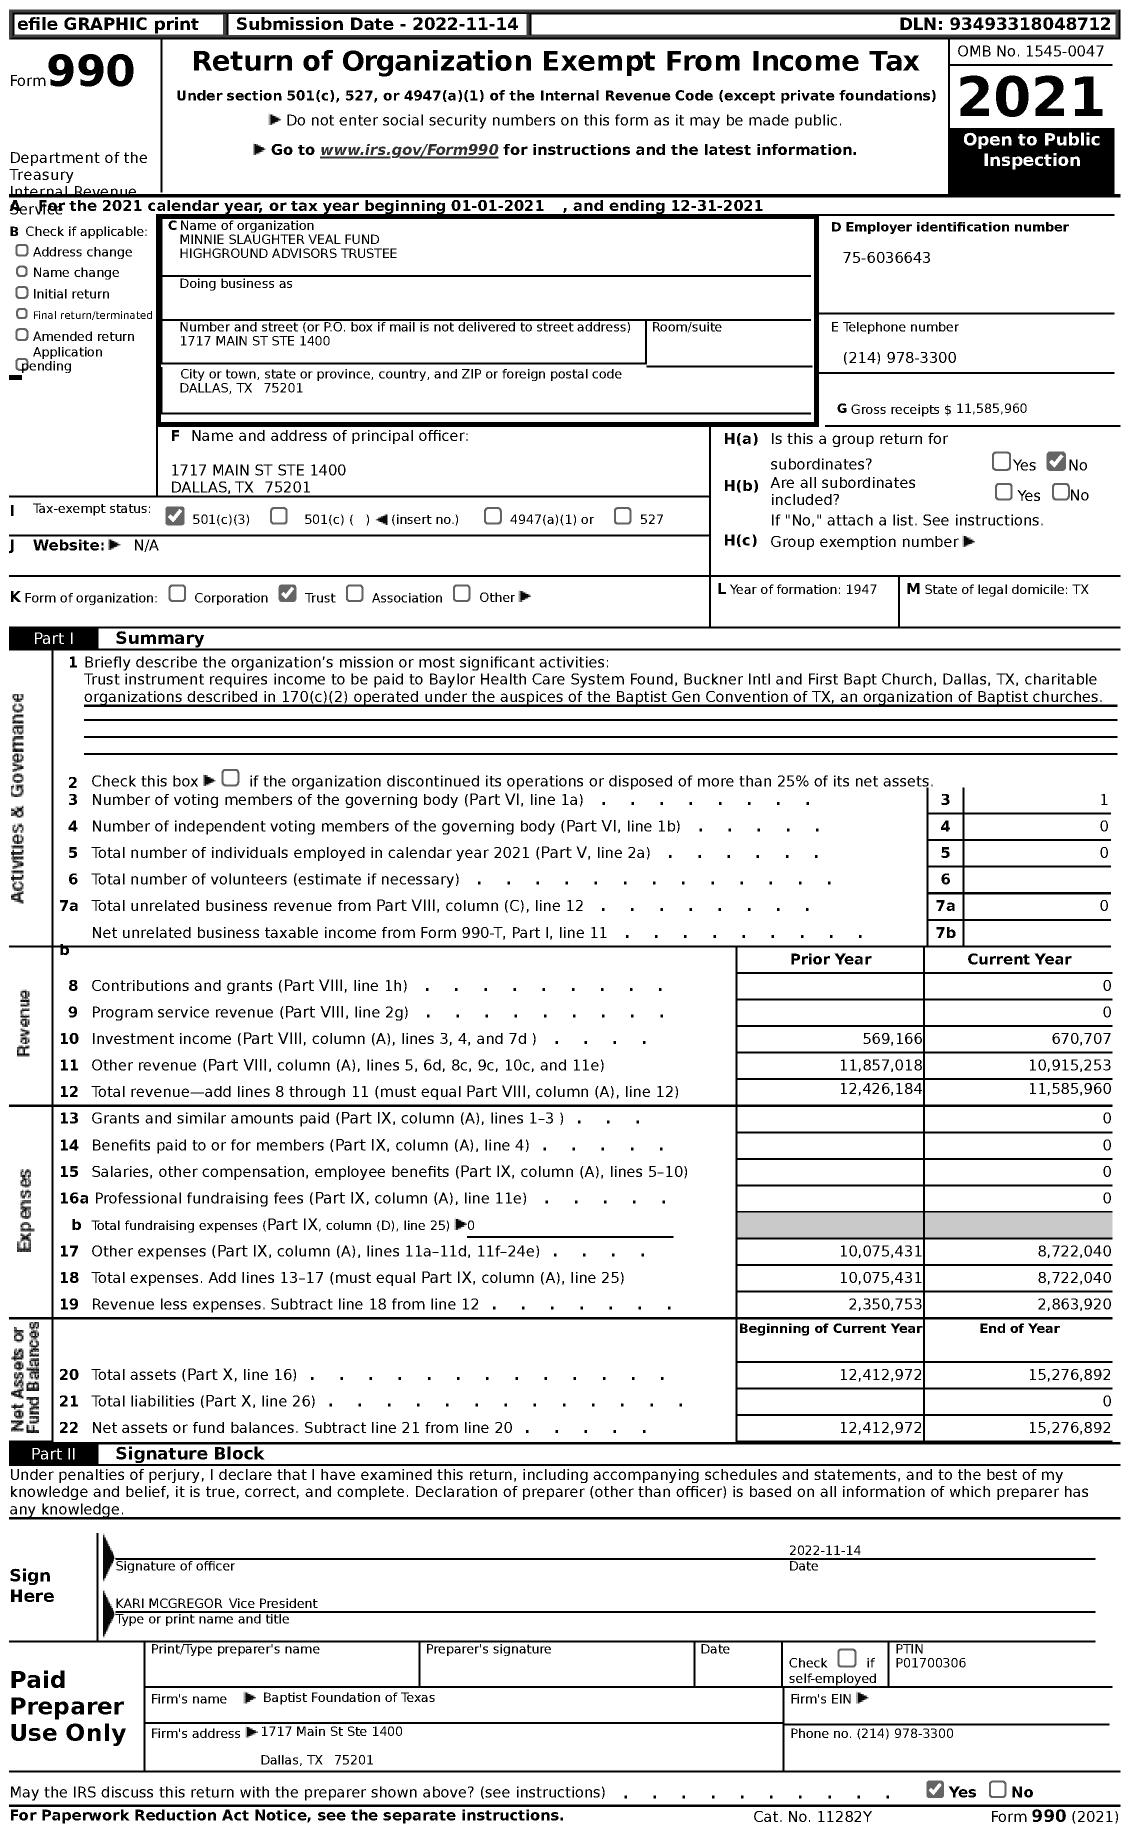 Image of first page of 2021 Form 990 for Minnie Slaughter Veal Fund Highground Advisors Trustee